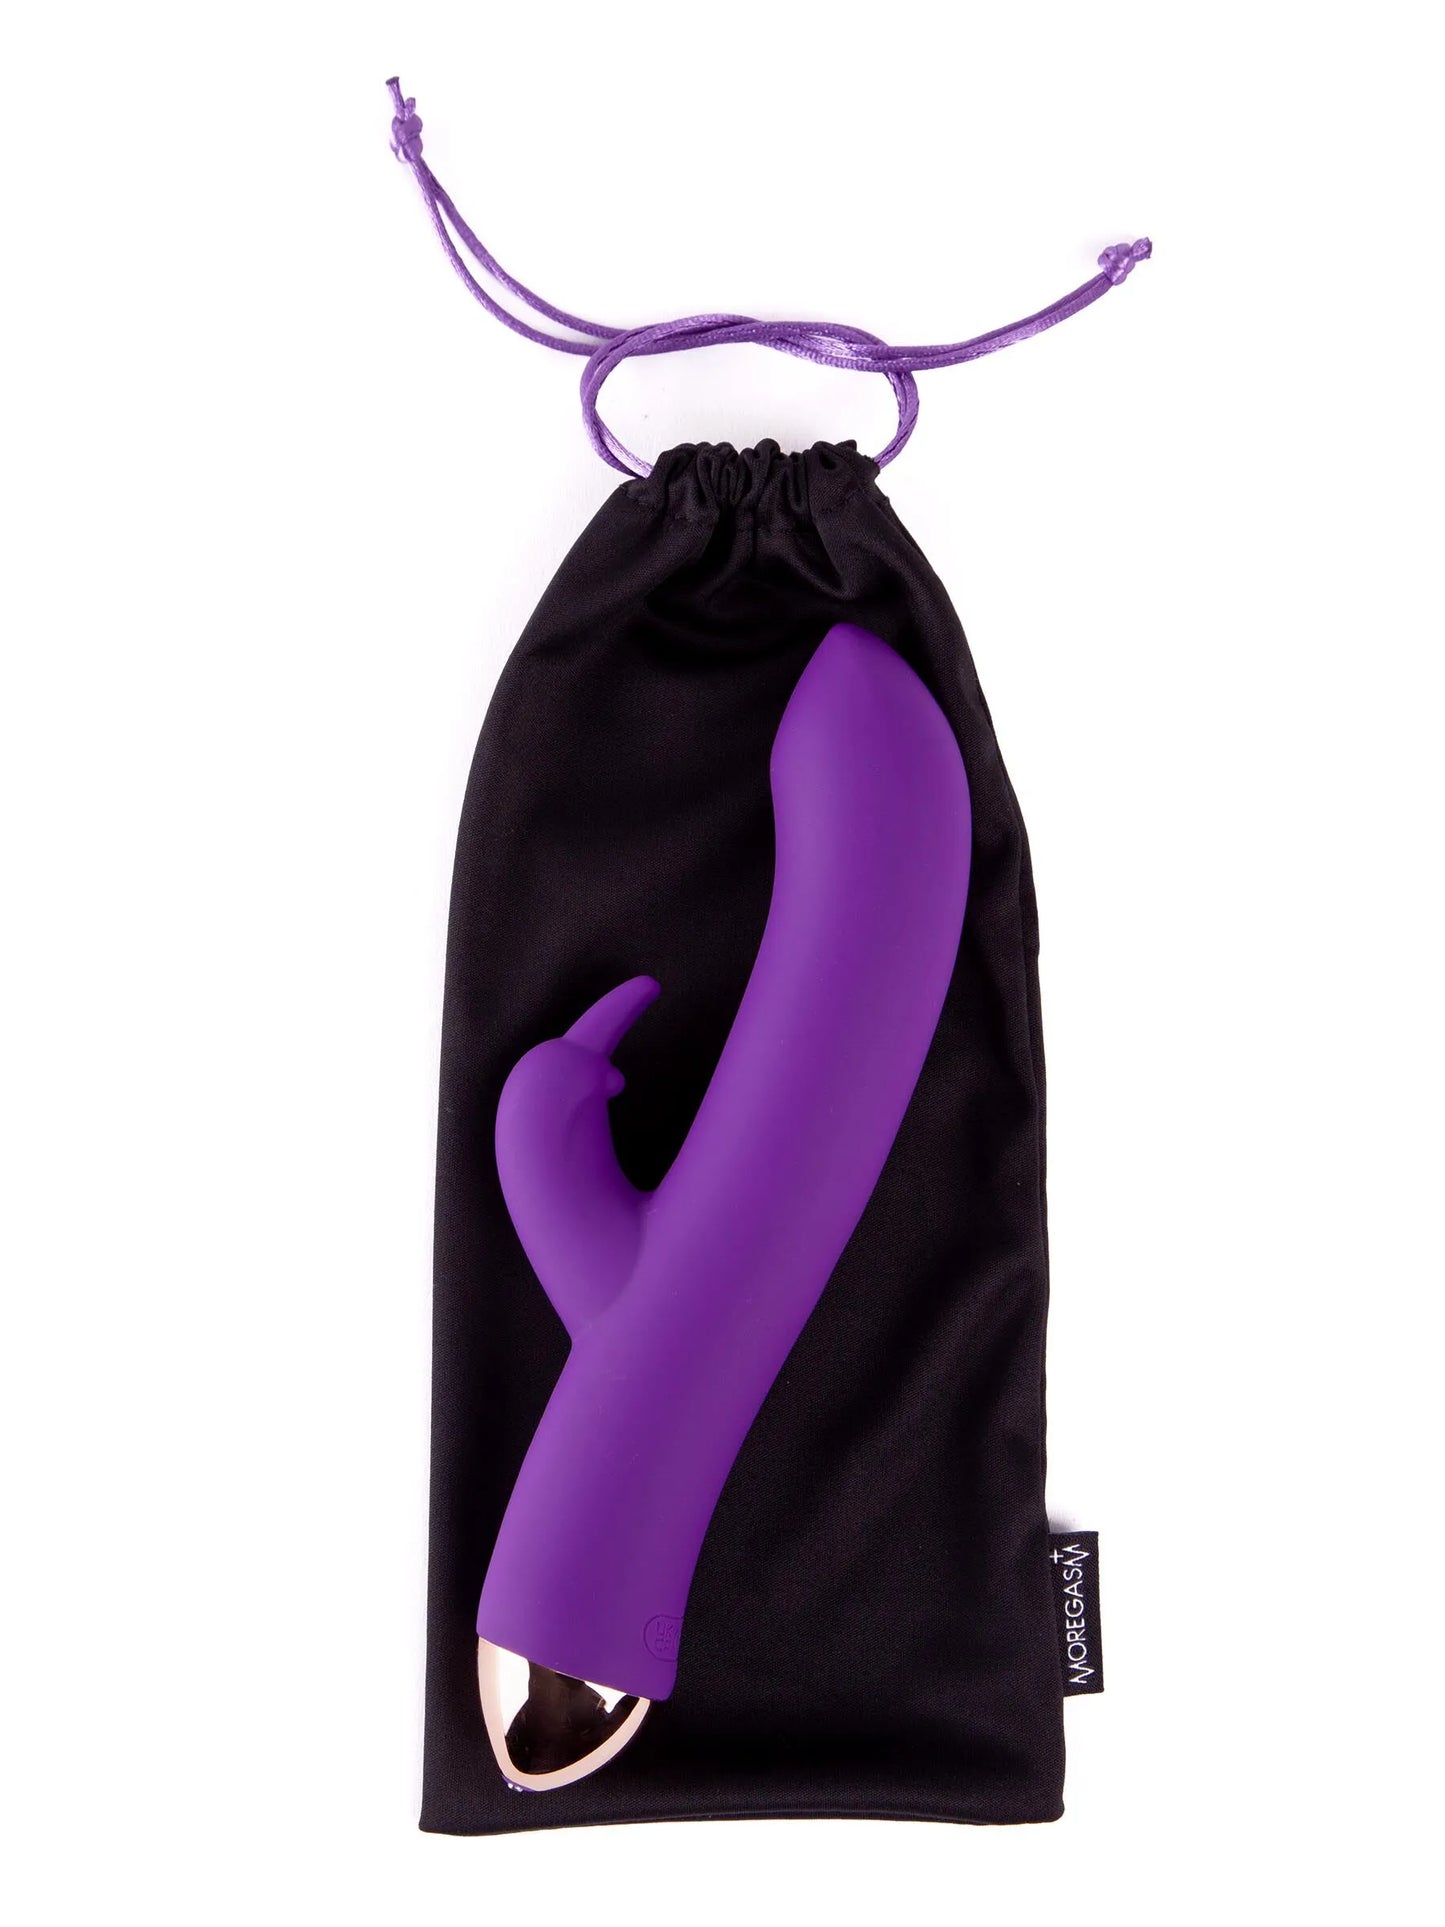 Moregasm Boost Rabbit From Ann Summers, Image 01